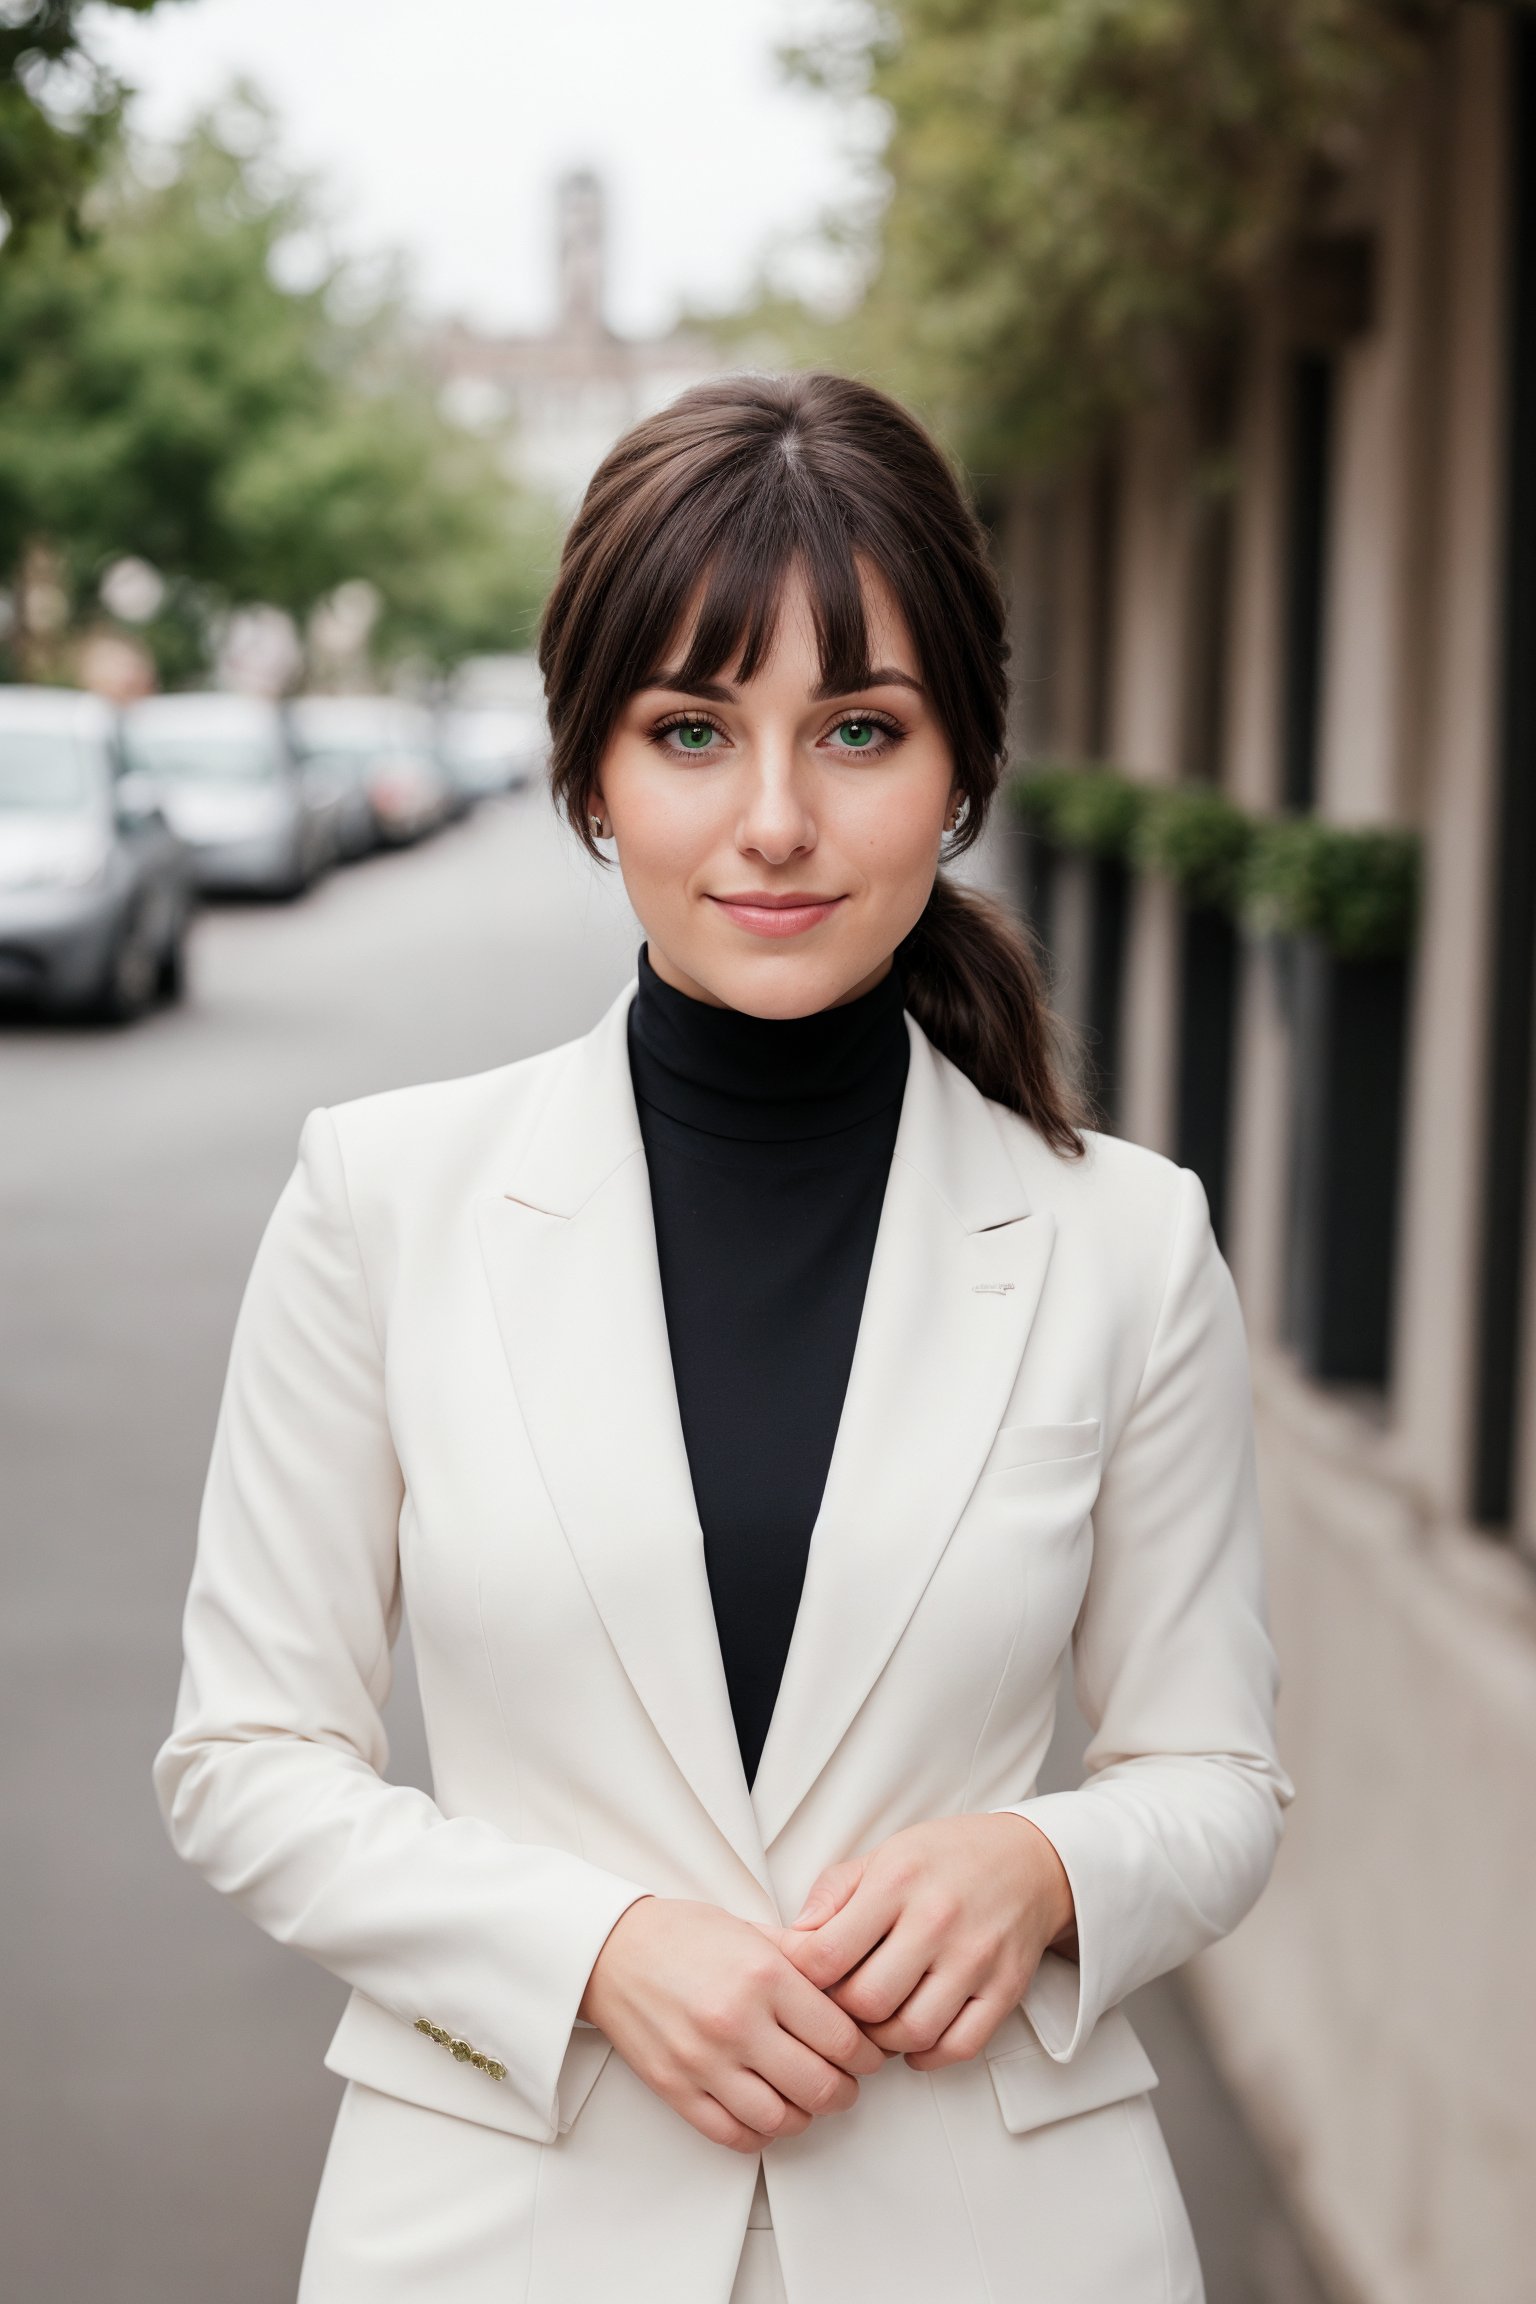 a photo of a cute 30-year-old woman, dgmochav2_TI, professional portrait photo,Slack-jawed awe look on face, high neck Emerald Kashmiri Pashmina Suit, high ponytail and bangs, soft lighting, solo, background of Tech Startup